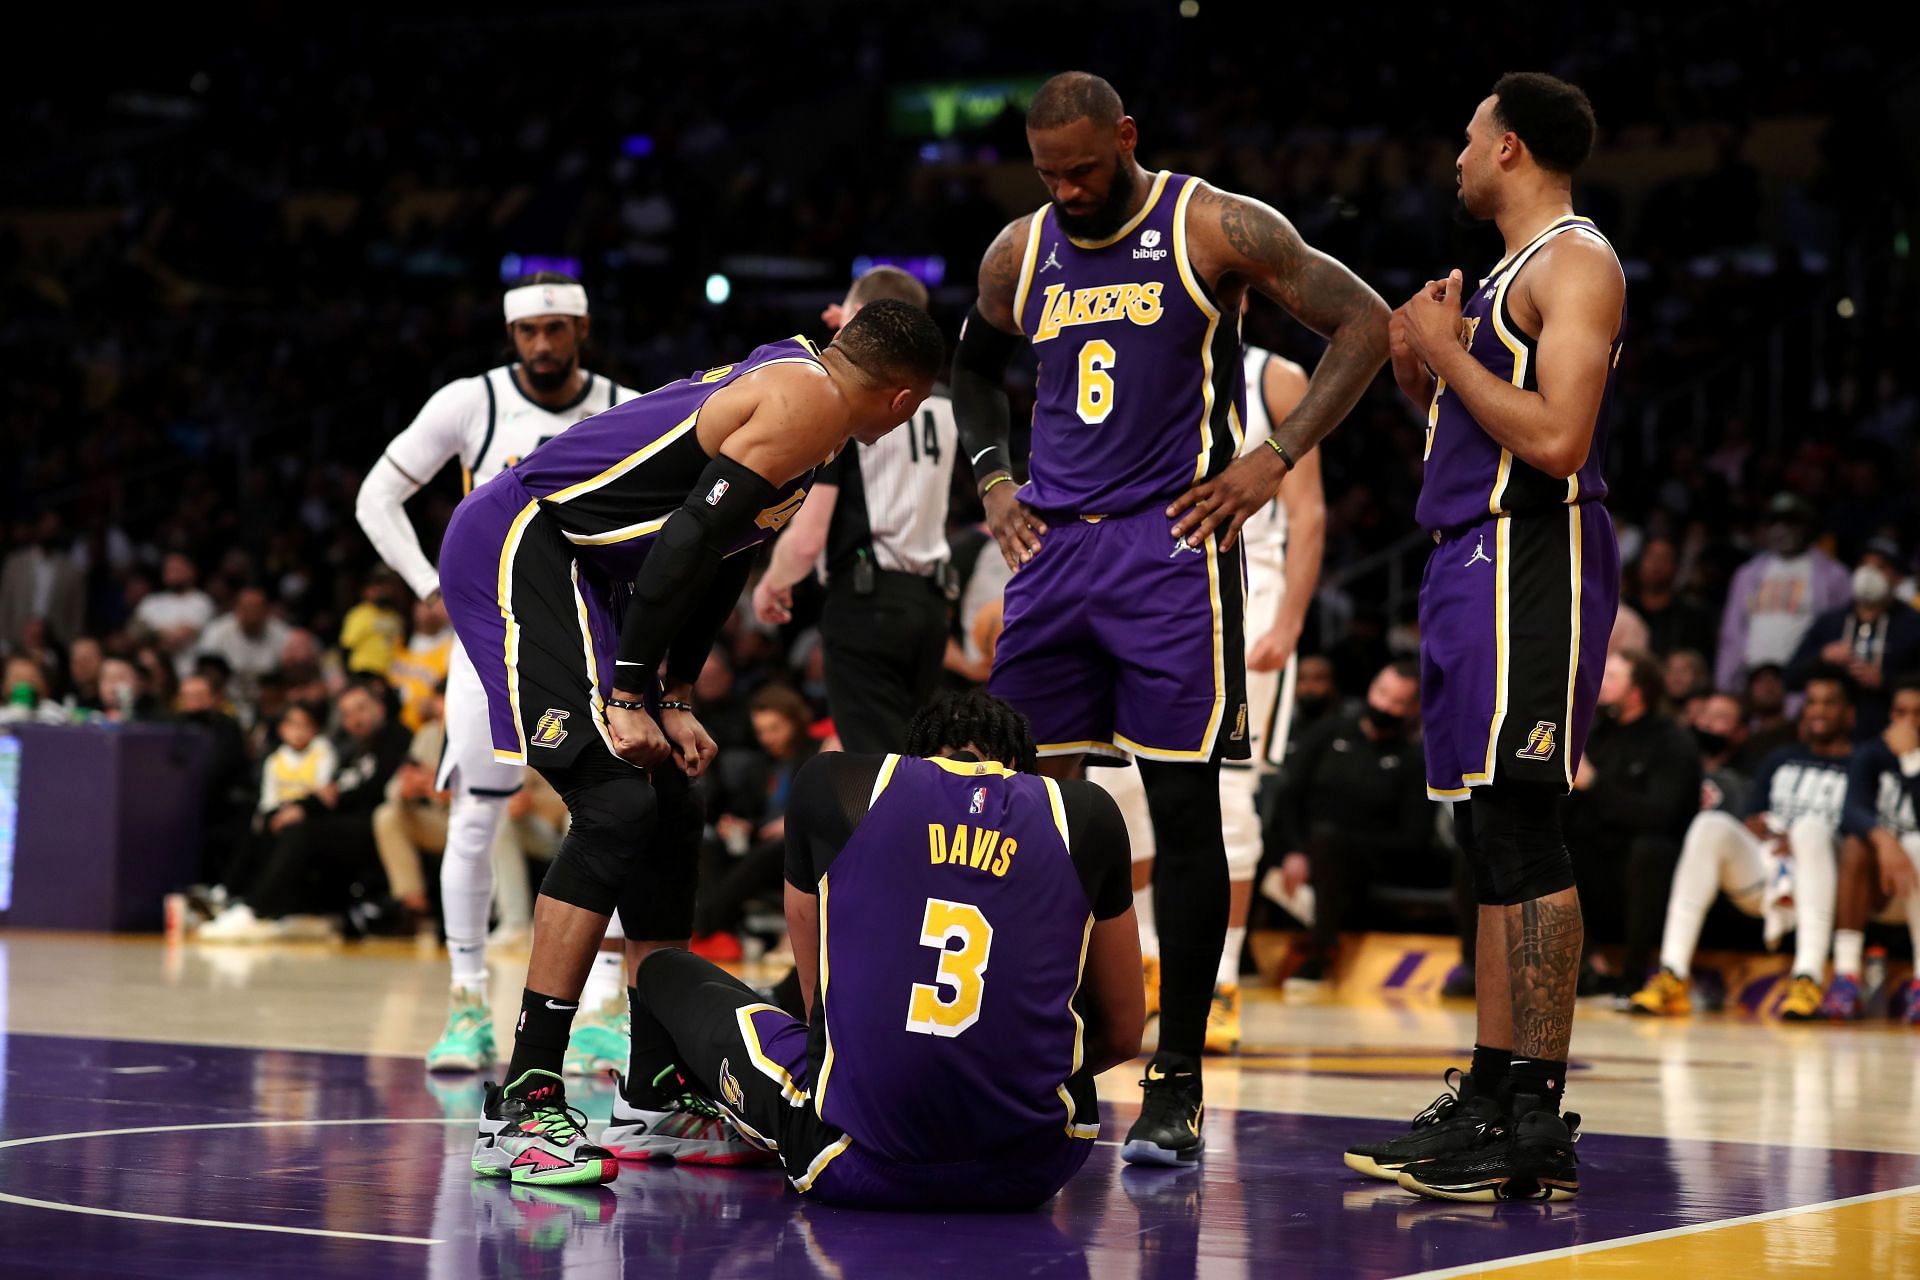 Russell Westbrook and LeBron James of the LA Lakers check on teammate Anthony Davis (#3).